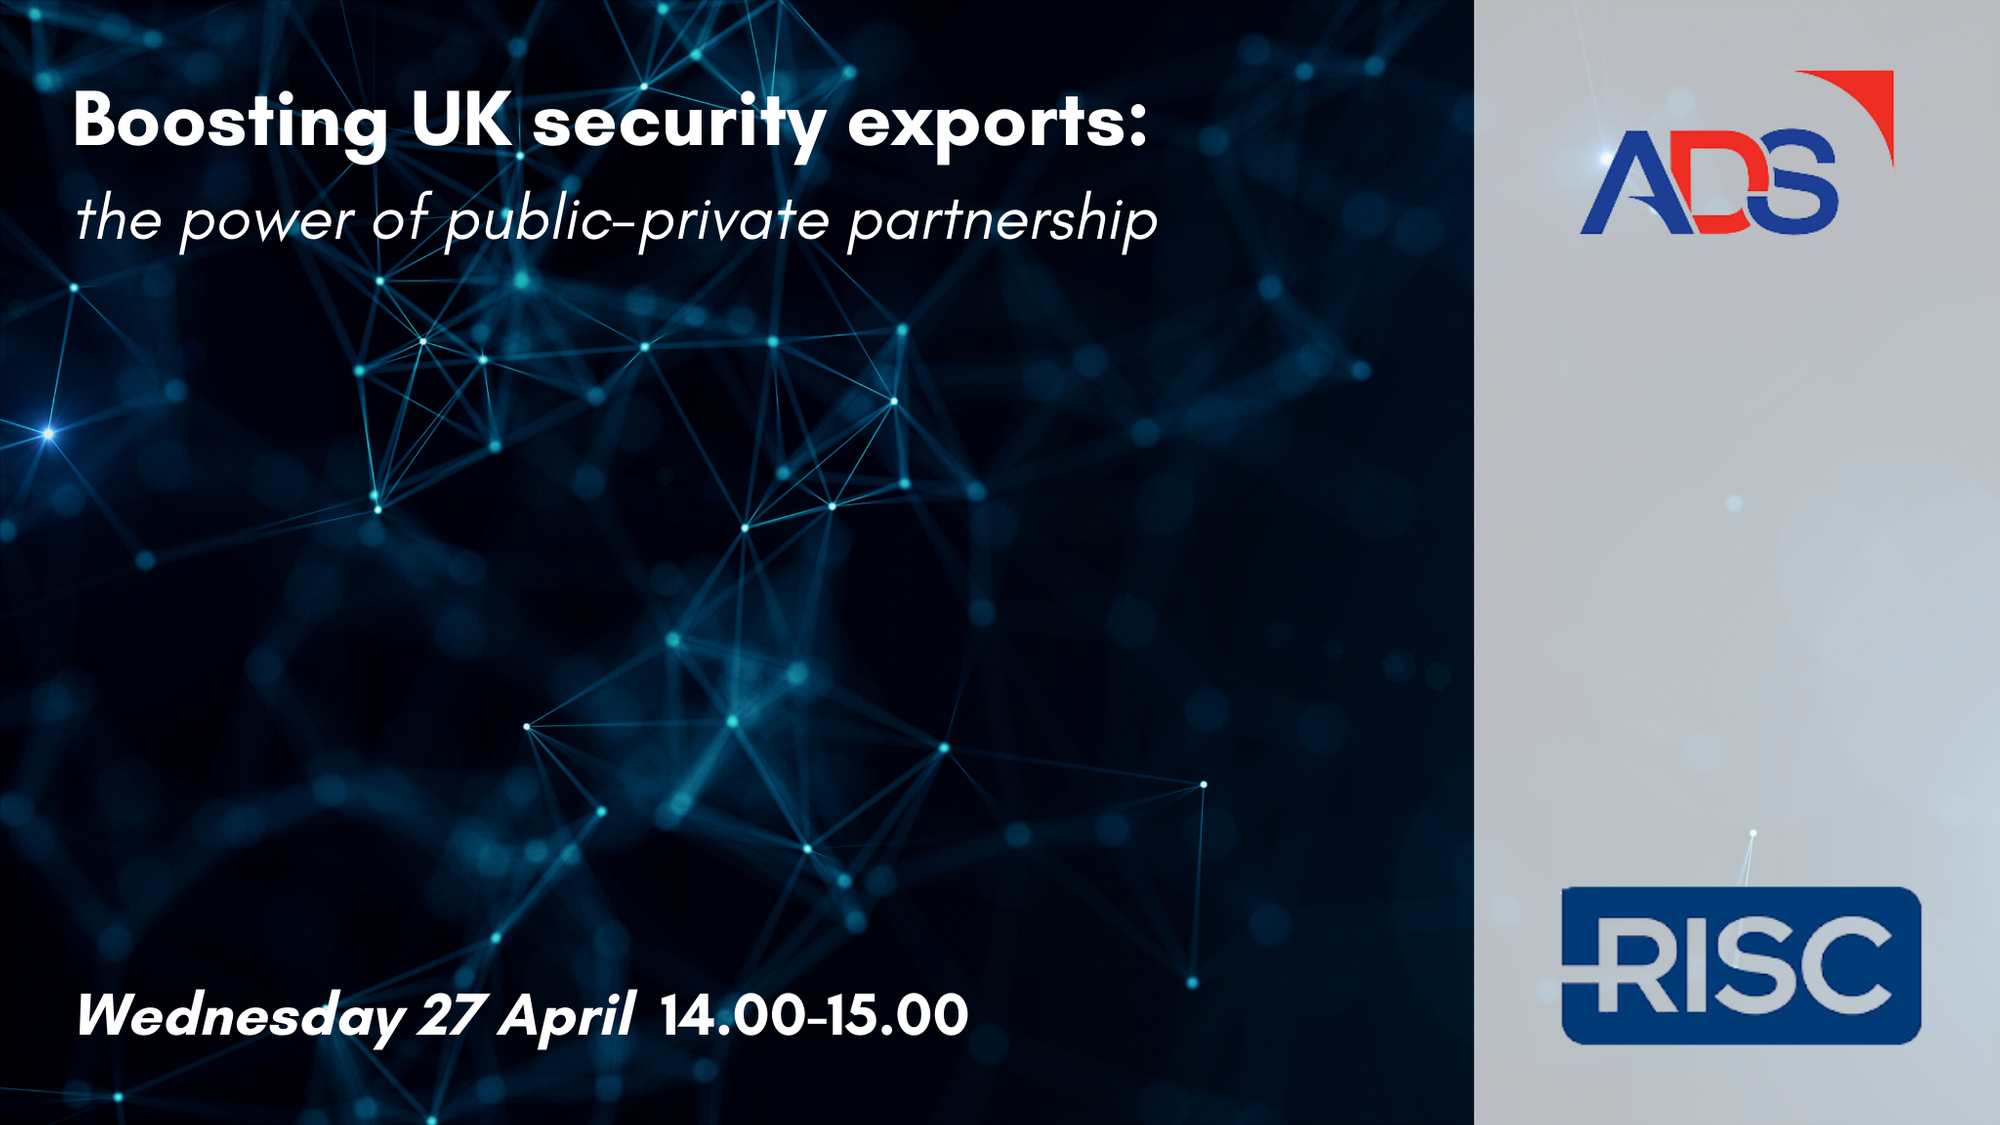 Boosting UK security exports: the power of public-private partnership